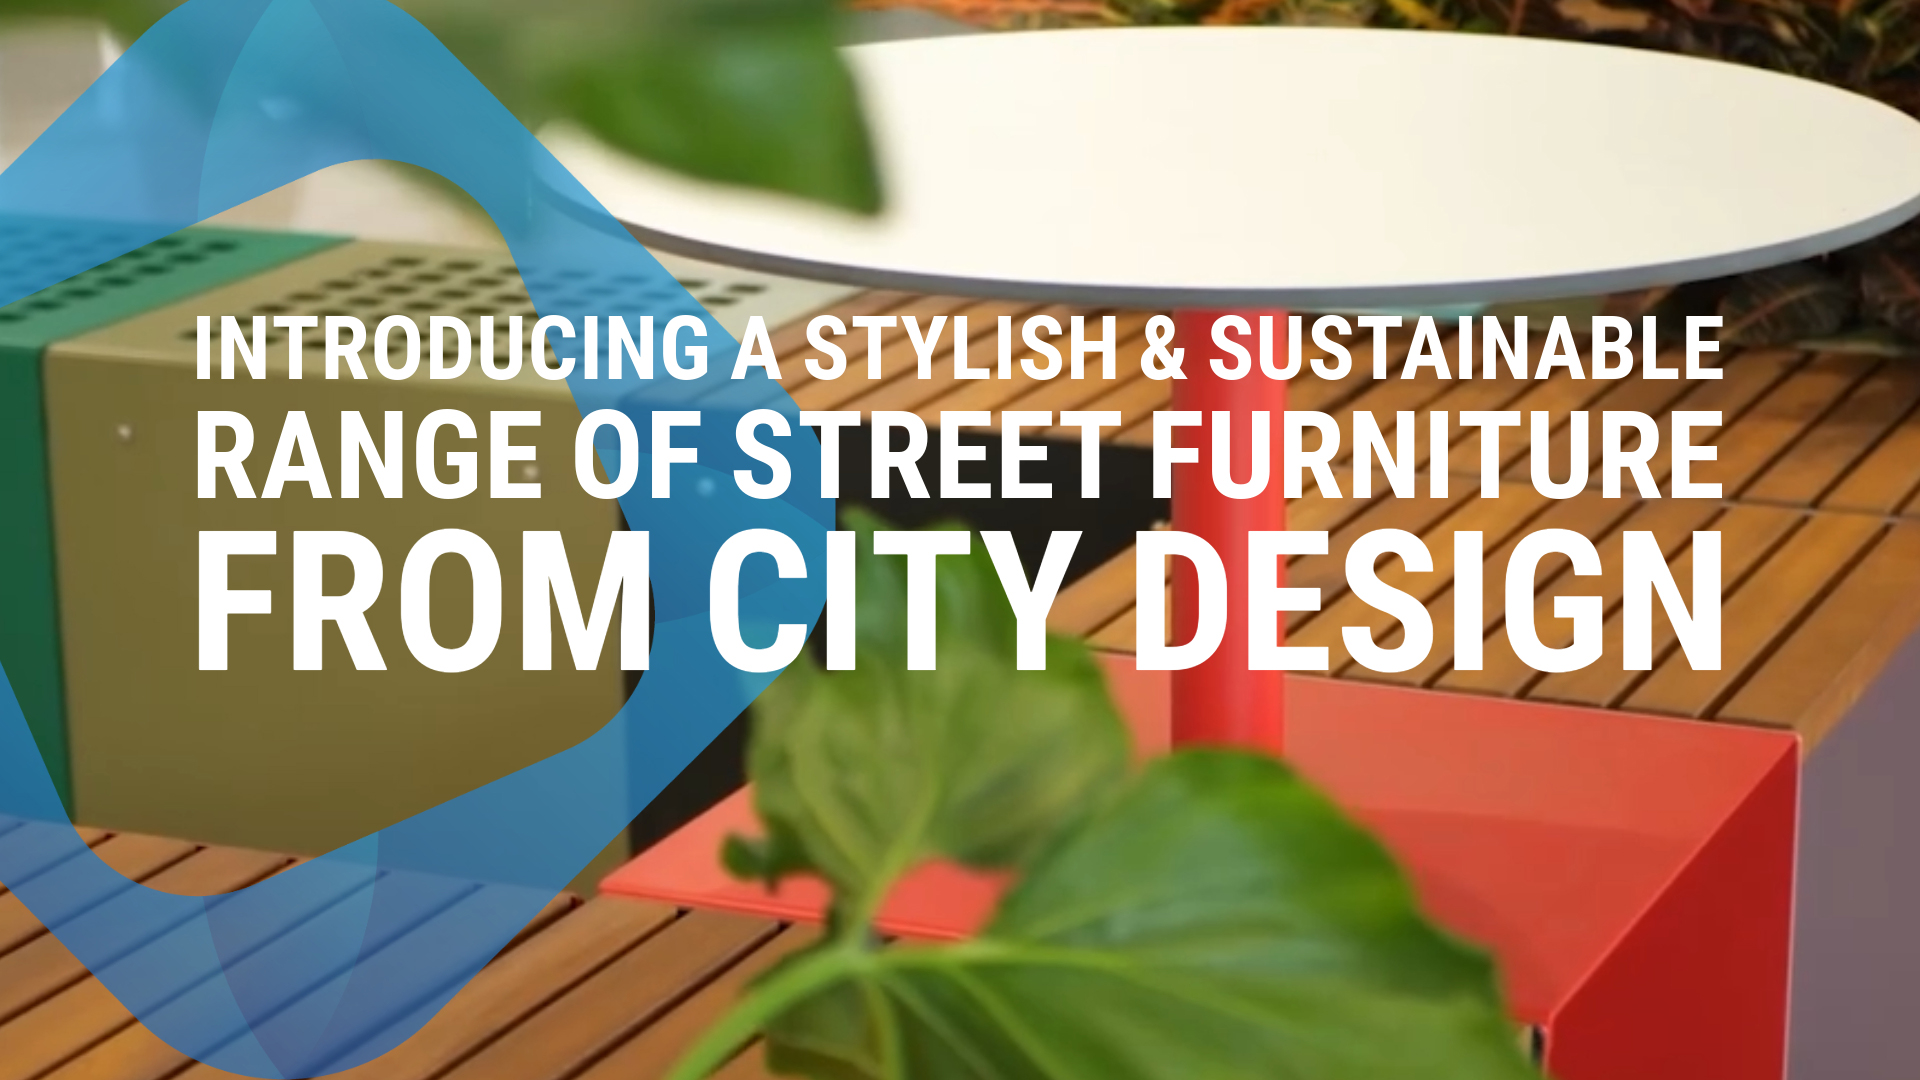 Introducing a new range of Street Furniture from City Design